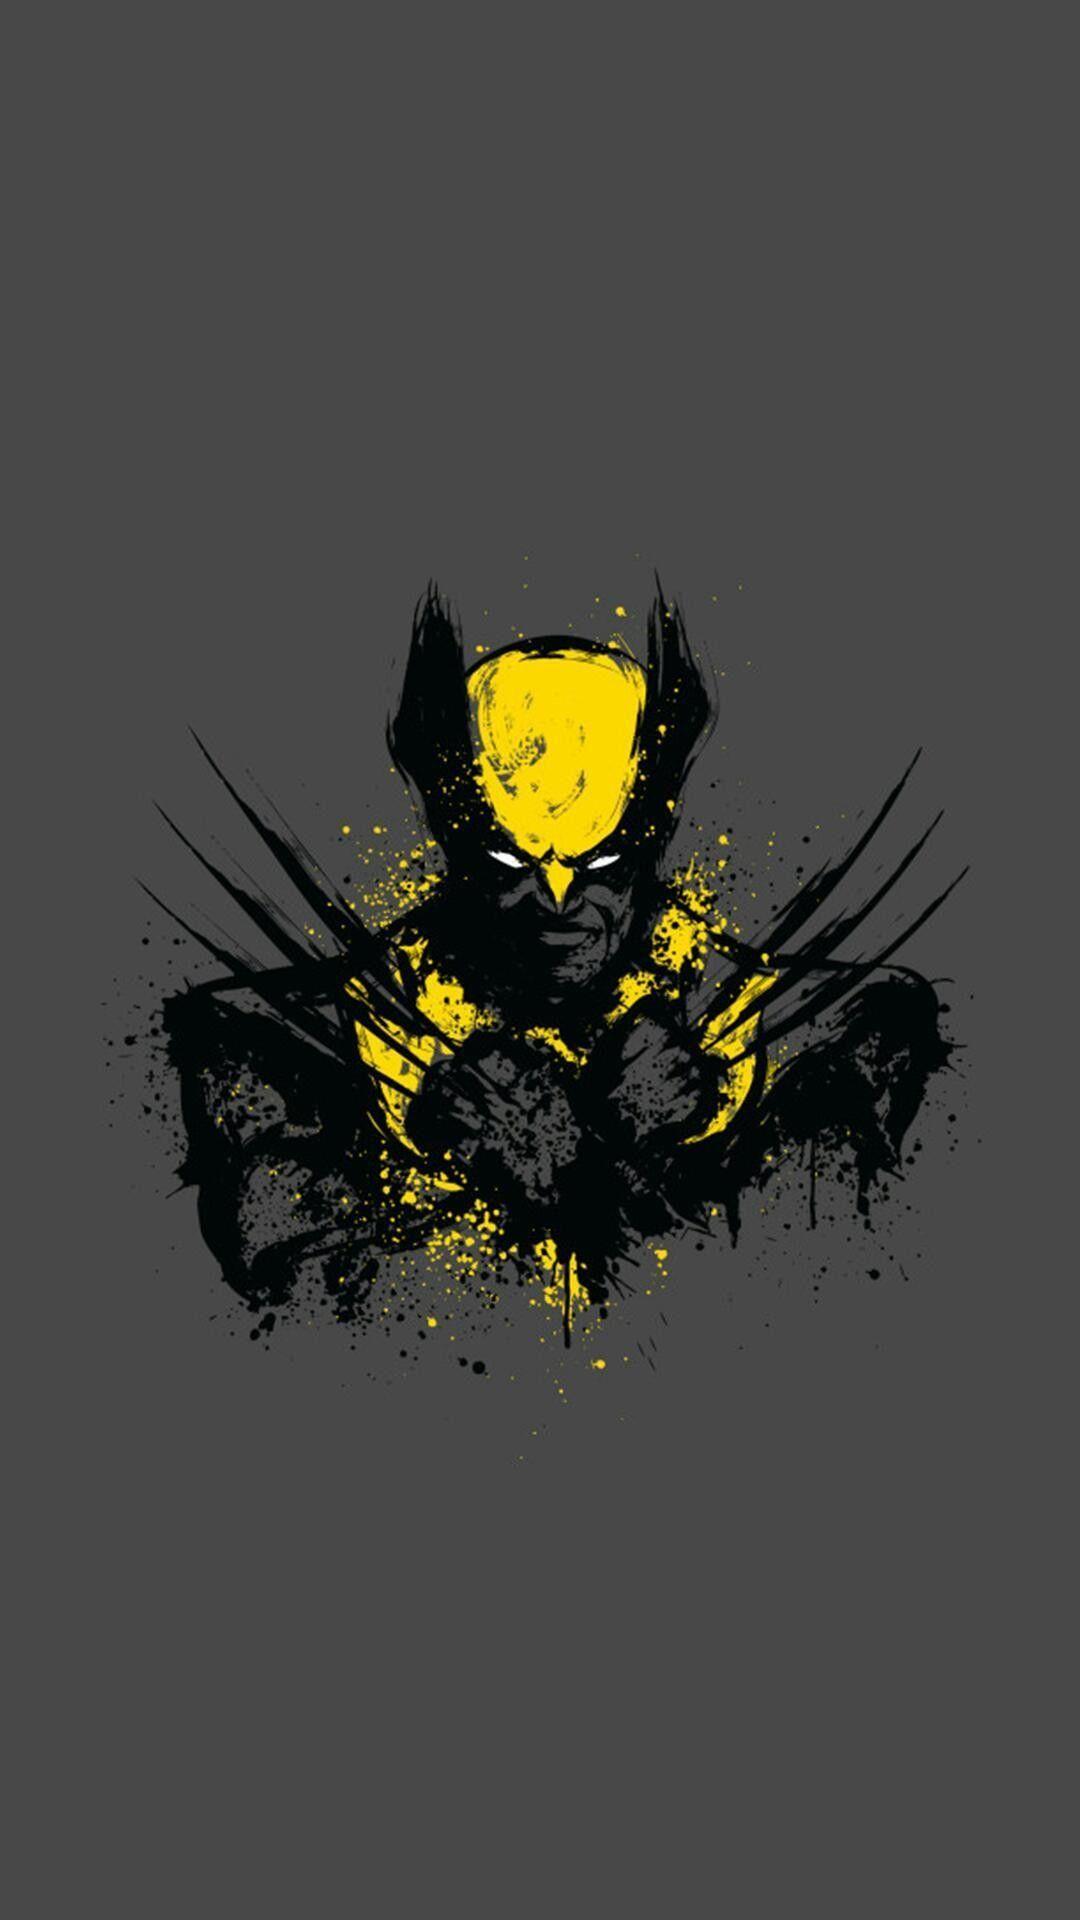 Wolverine Iphone X Wallpapers Wallpaper Cave